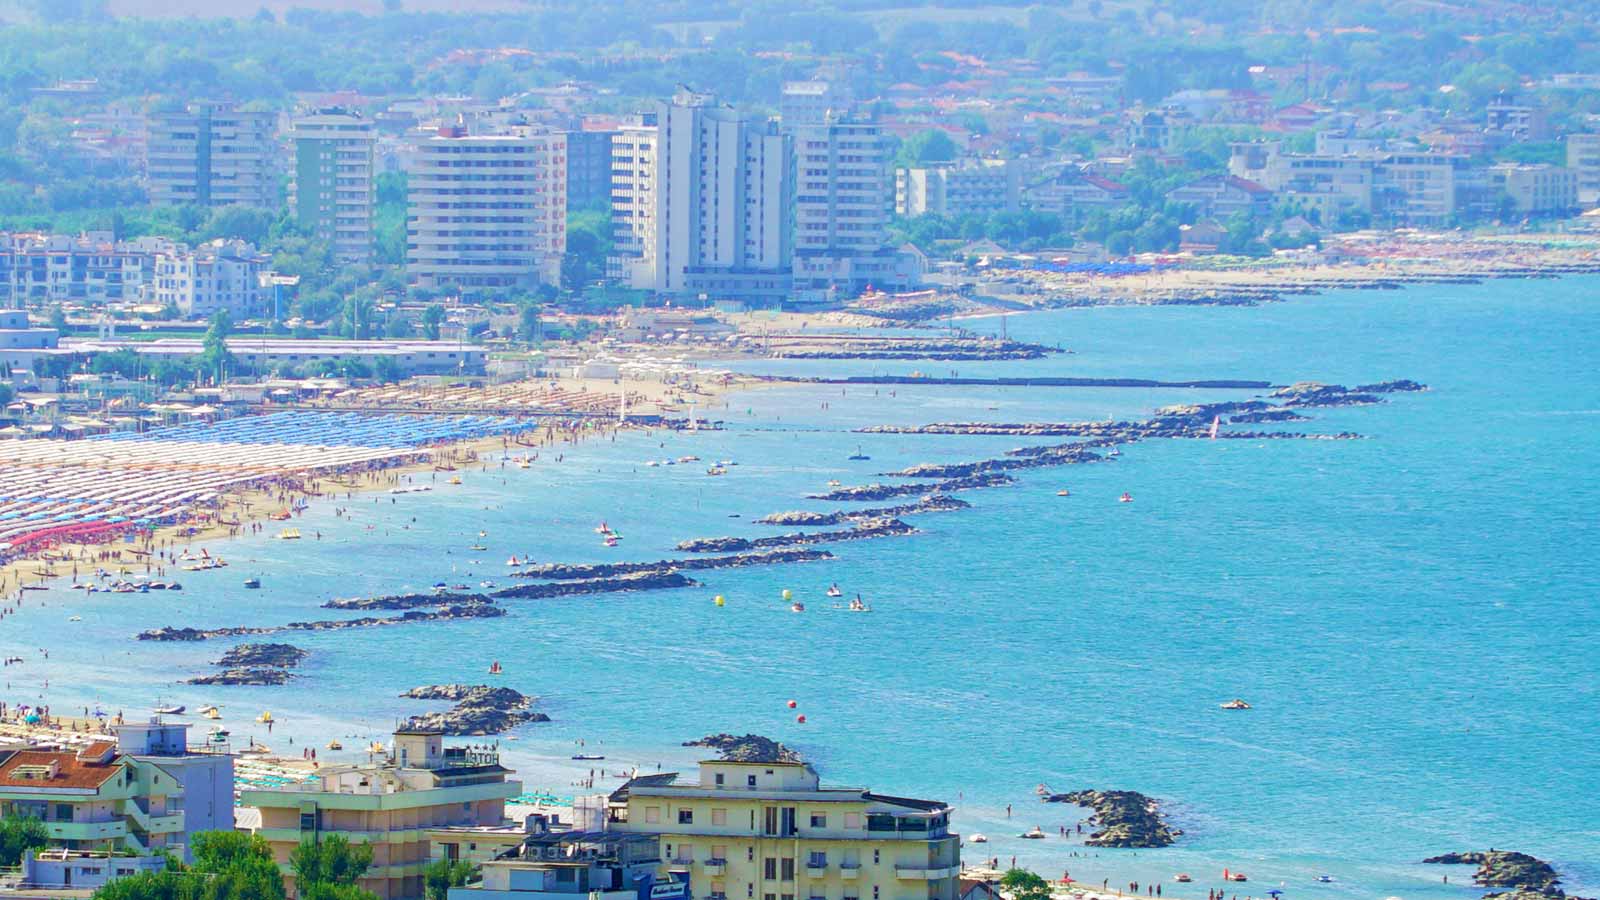 Aerial view of Cattolica